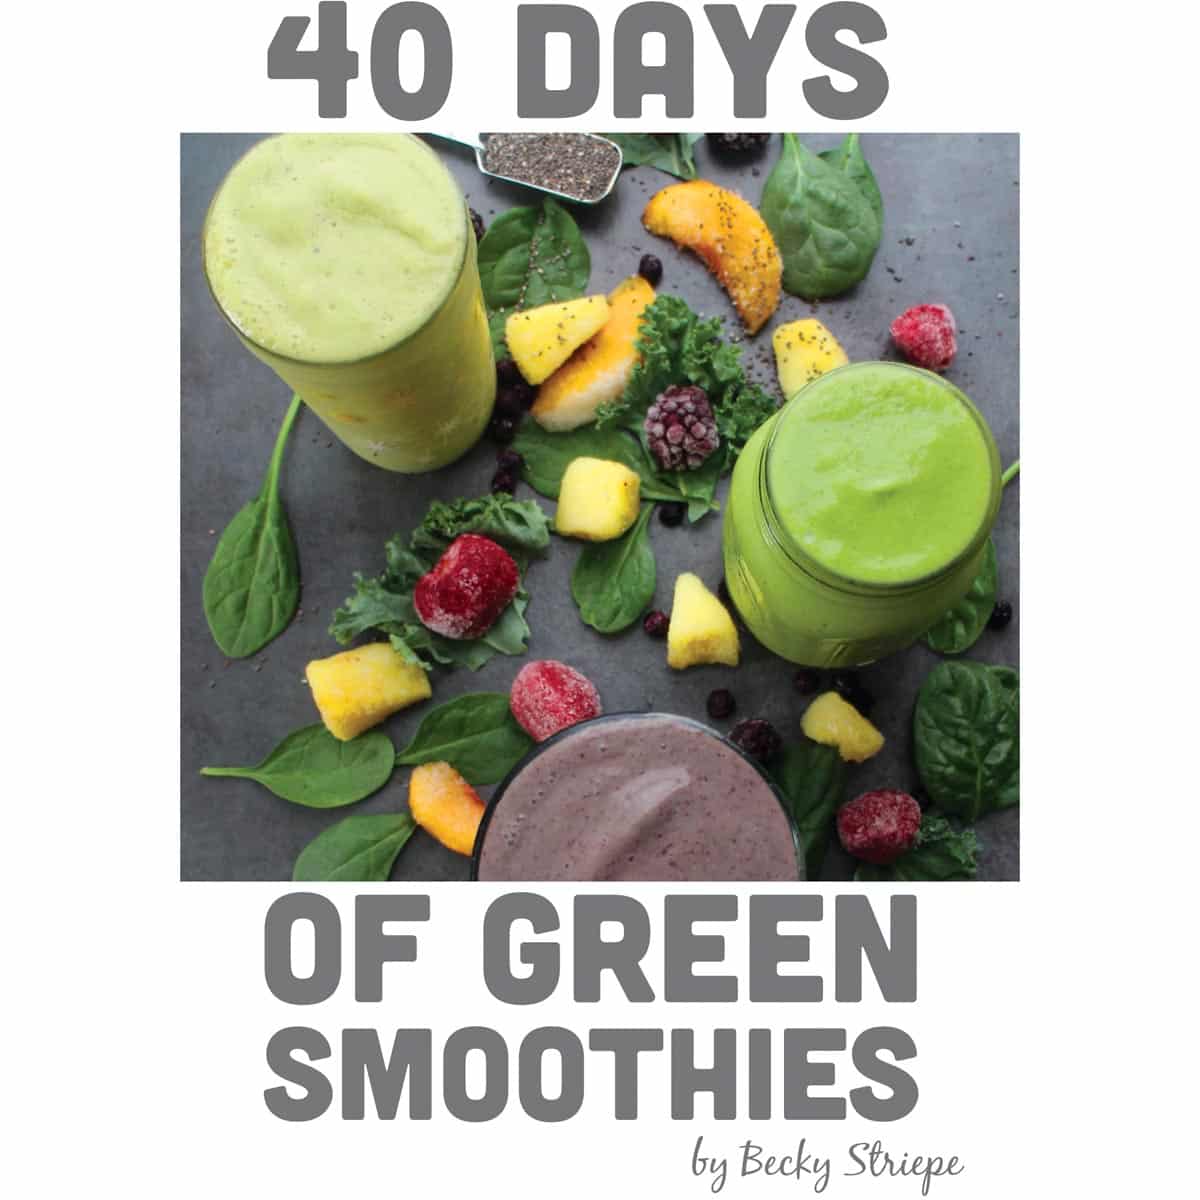 40 Days of Green Smoothies